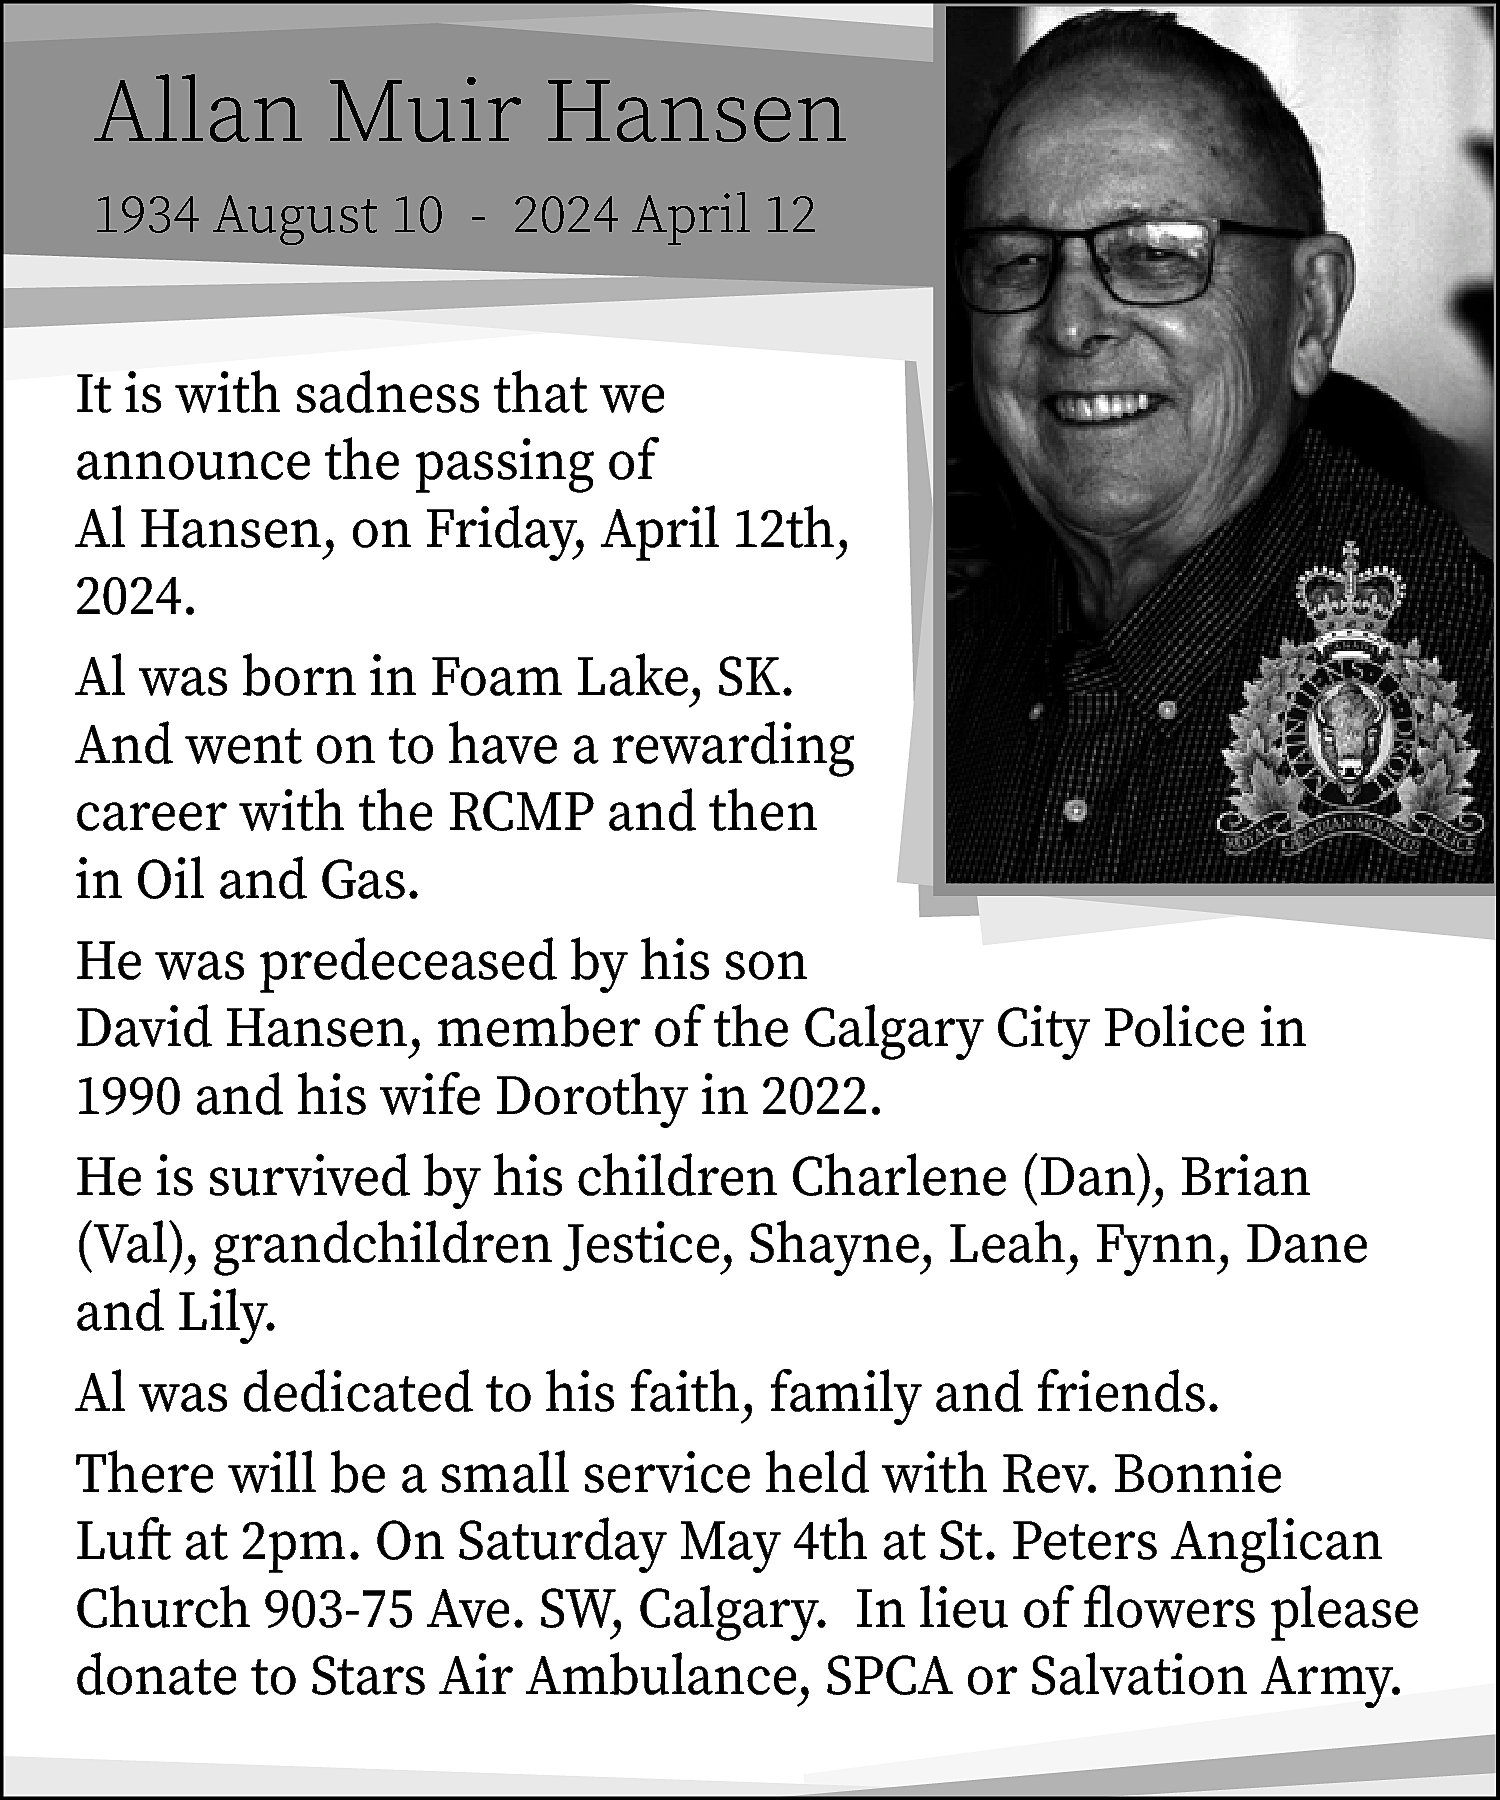 Allan Muir Hansen <br>1934 August  Allan Muir Hansen  1934 August 10 - 2024 April 12    It is with sadness that we  announce the passing of  Al Hansen, on Friday, April 12th,  2024.  Al was born in Foam Lake, SK.  And went on to have a rewarding  career with the RCMP and then  in Oil and Gas.  He was predeceased by his son  David Hansen, member of the Calgary City Police in  1990 and his wife Dorothy in 2022.  He is survived by his children Charlene (Dan), Brian  (Val), grandchildren Jestice, Shayne, Leah, Fynn, Dane  and Lily.  Al was dedicated to his faith, family and friends.  There will be a small service held with Rev. Bonnie  Luft at 2pm. On Saturday May 4th at St. Peters Anglican  Church 903-75 Ave. SW, Calgary. In lieu of flowers please  donate to Stars Air Ambulance, SPCA or Salvation Army.    